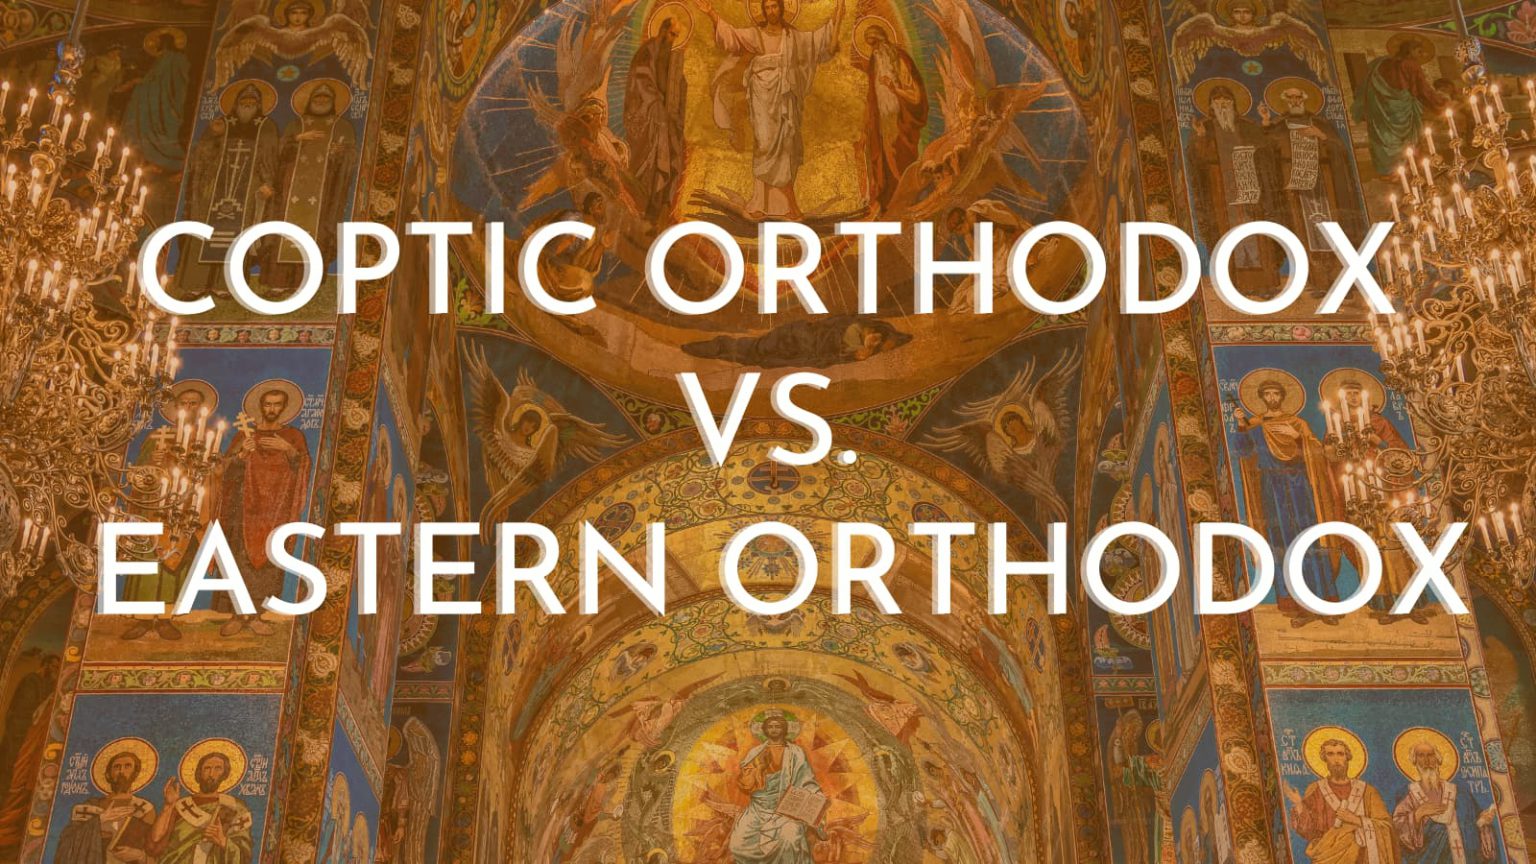 What's The Difference Between Coptic and Eastern Orthodox? » Saint John